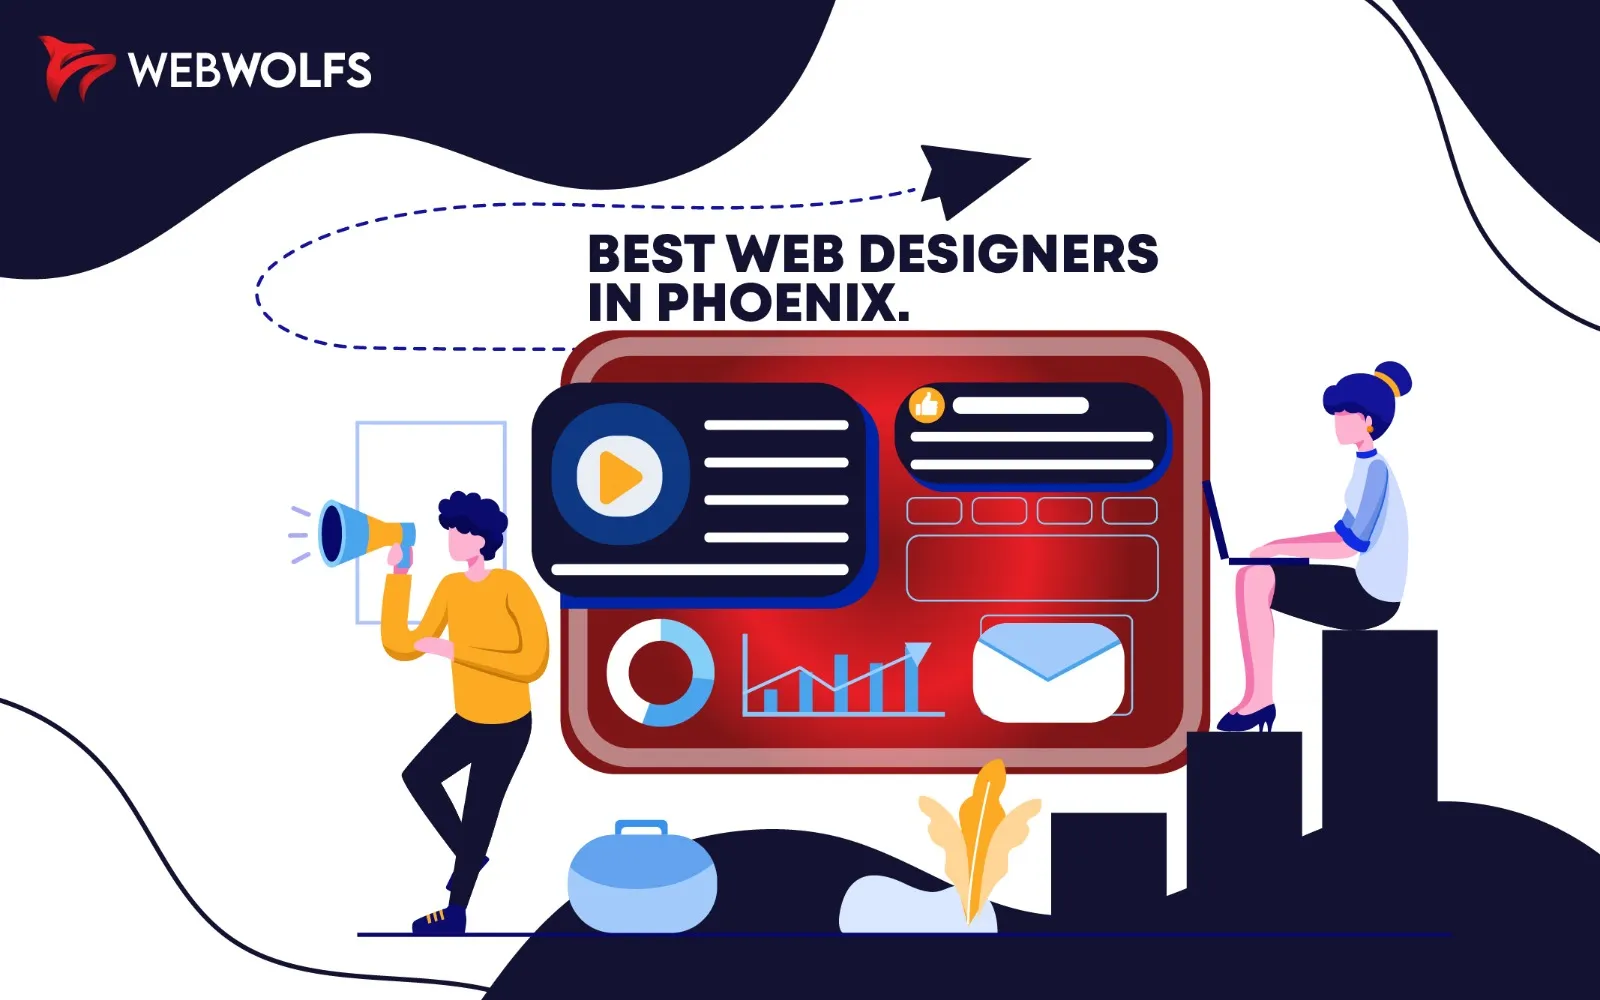 How To Redesign With The Best Web Designers In Phoenix?